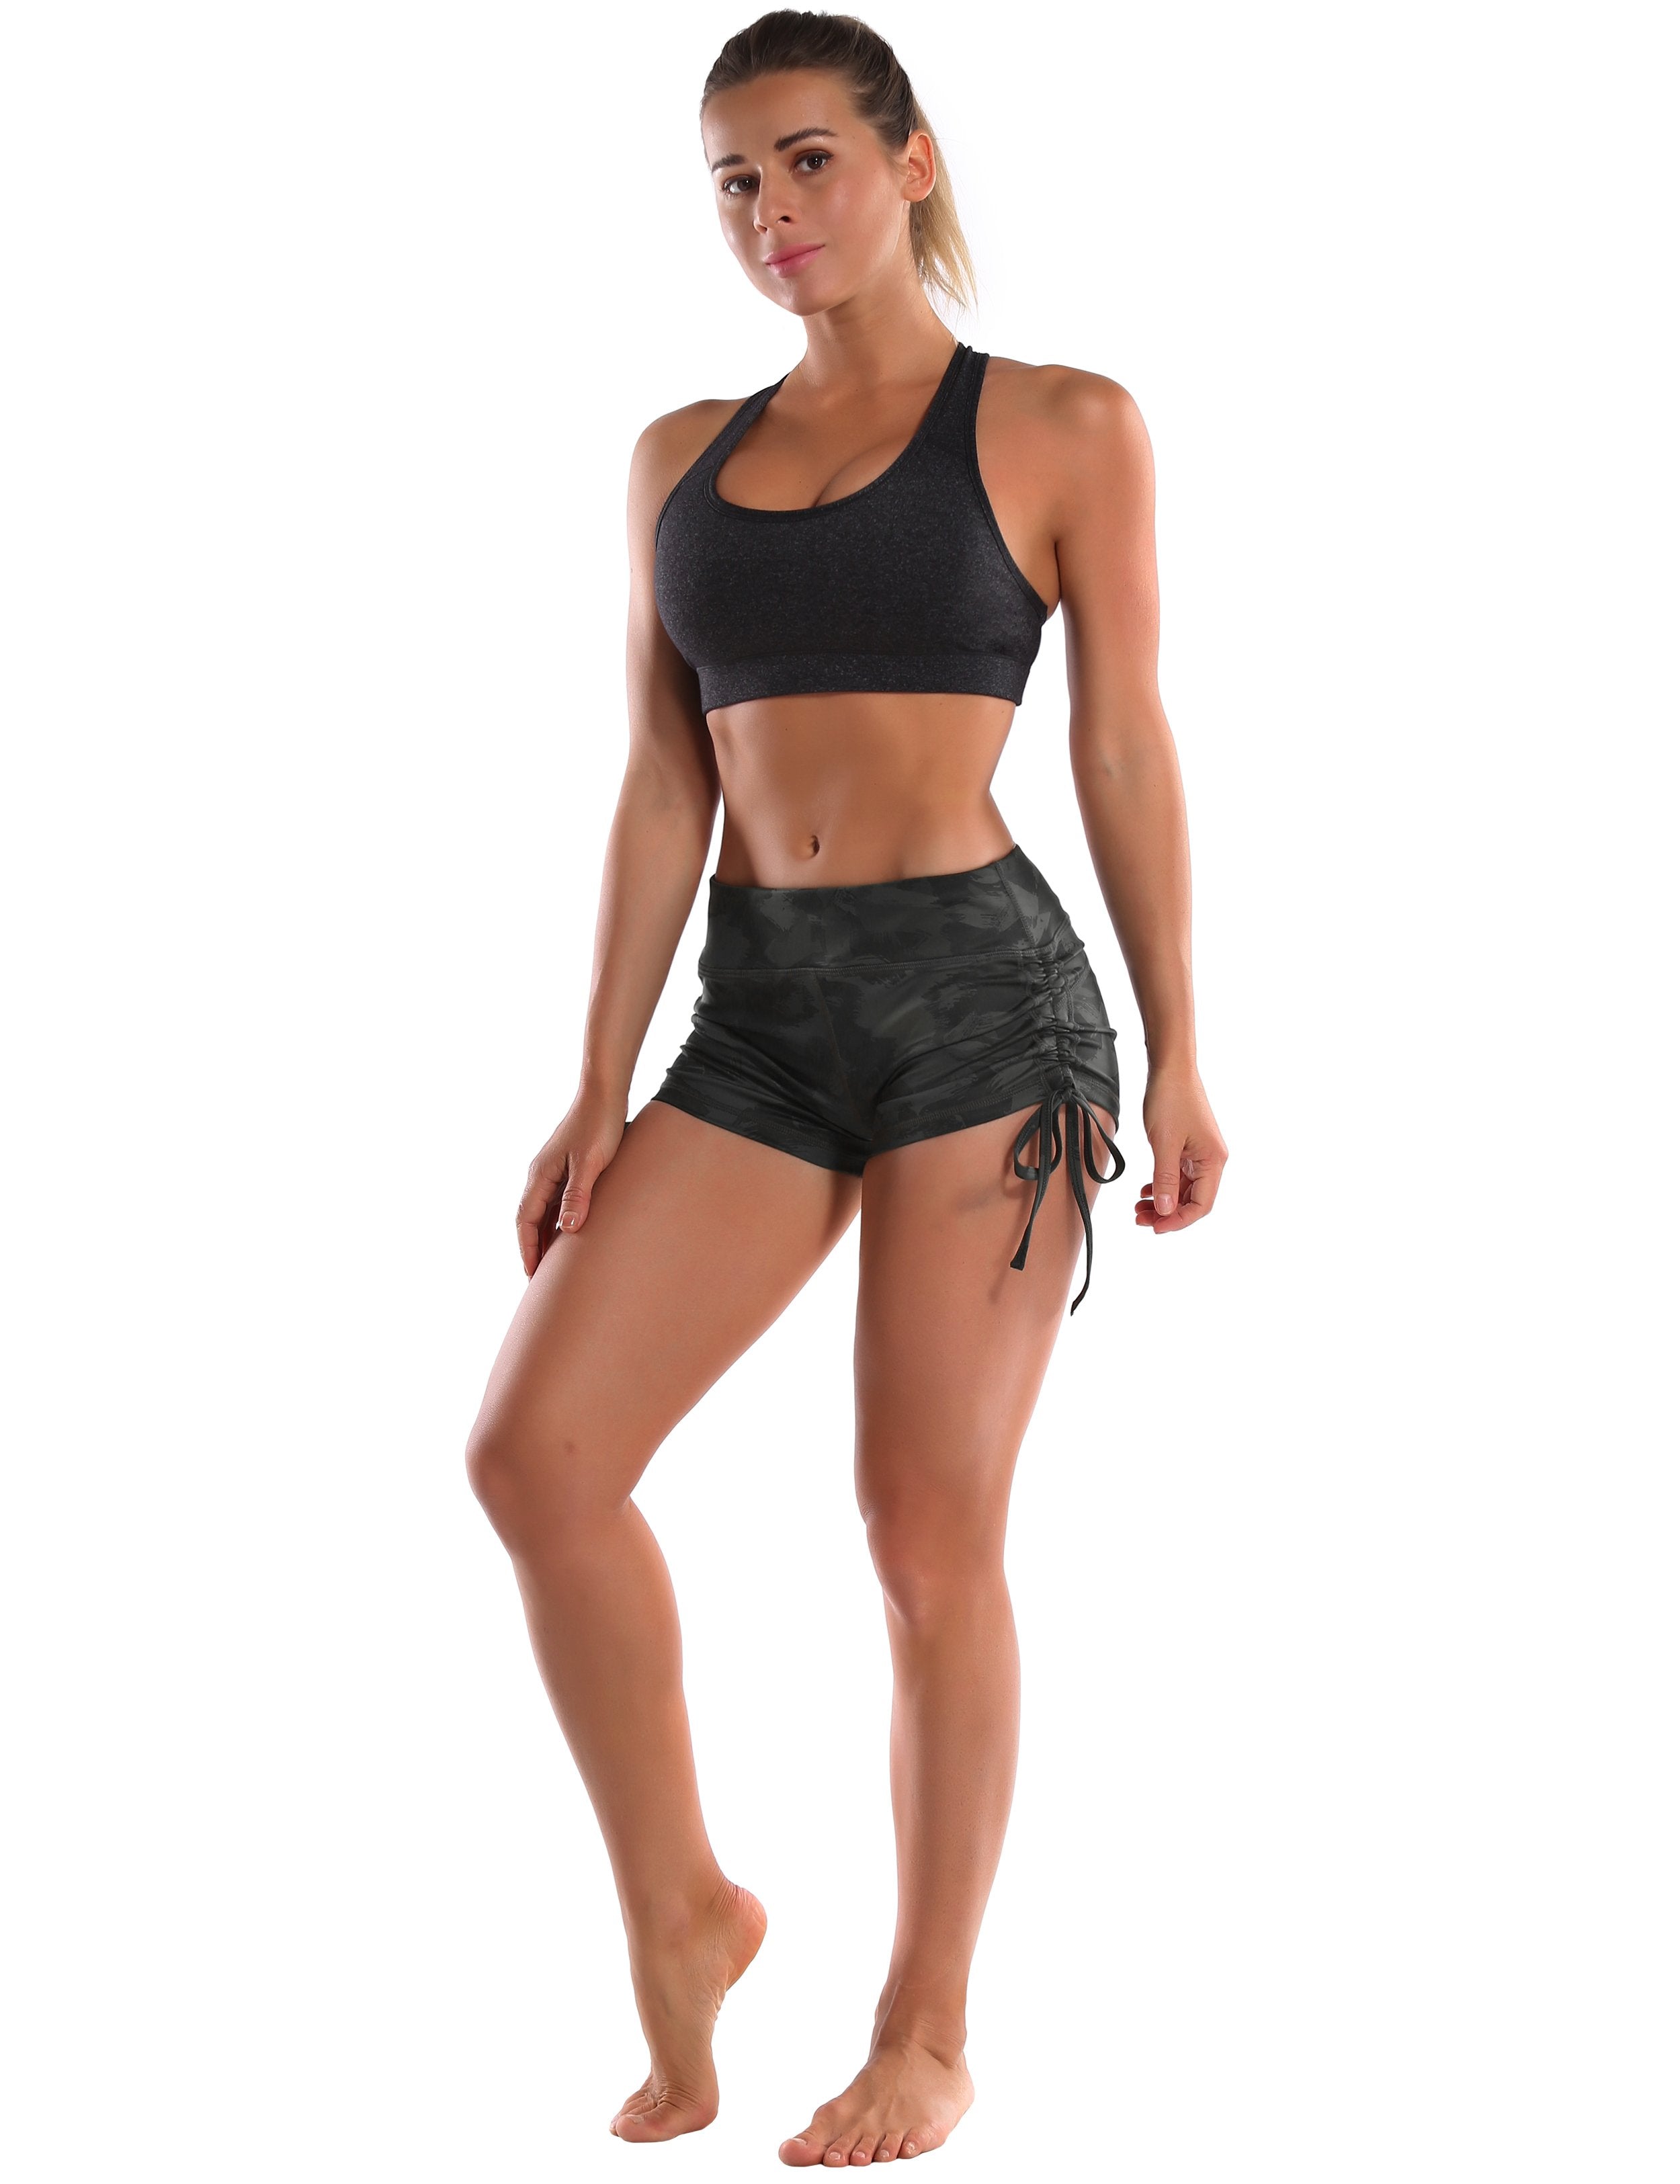 Printed Side Drawstring Hot Shorts dimgray brushcamo Sleek, soft, smooth and totally comfortable: our newest sexy style is here. Softest-ever fabric High elasticity High density 4-way stretch Fabric doesn't attract lint easily No see-through Moisture-wicking Machine wash 78% Polyester, 22% Spandex